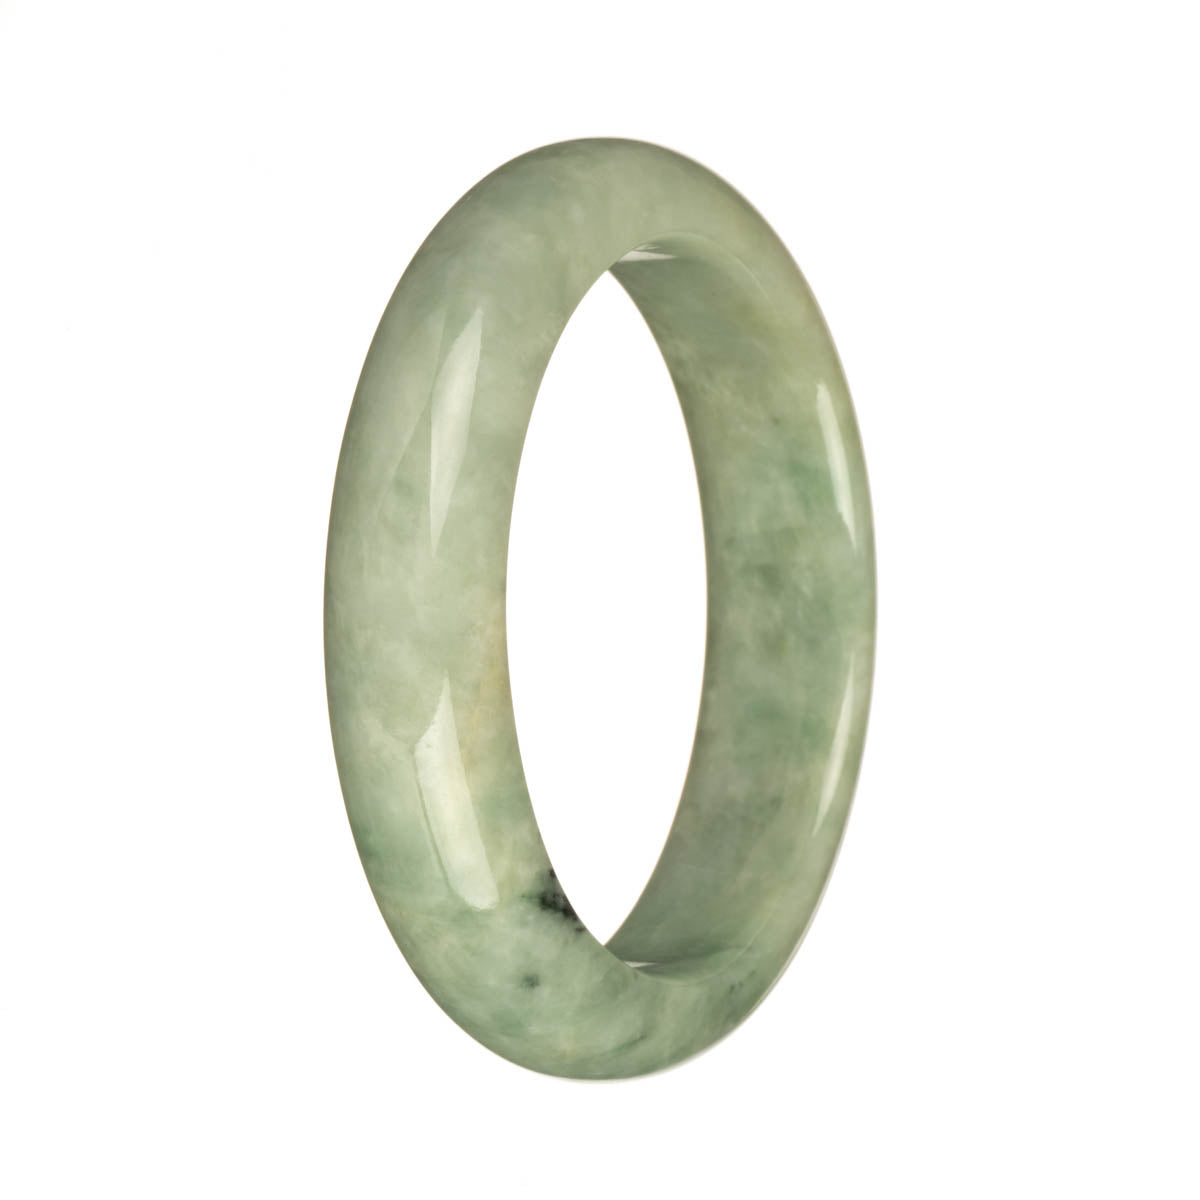 Real Grade A Light Green with Apple Green and Deep Green Patterns Traditional Jade Bracelet - 57mm Half Moon